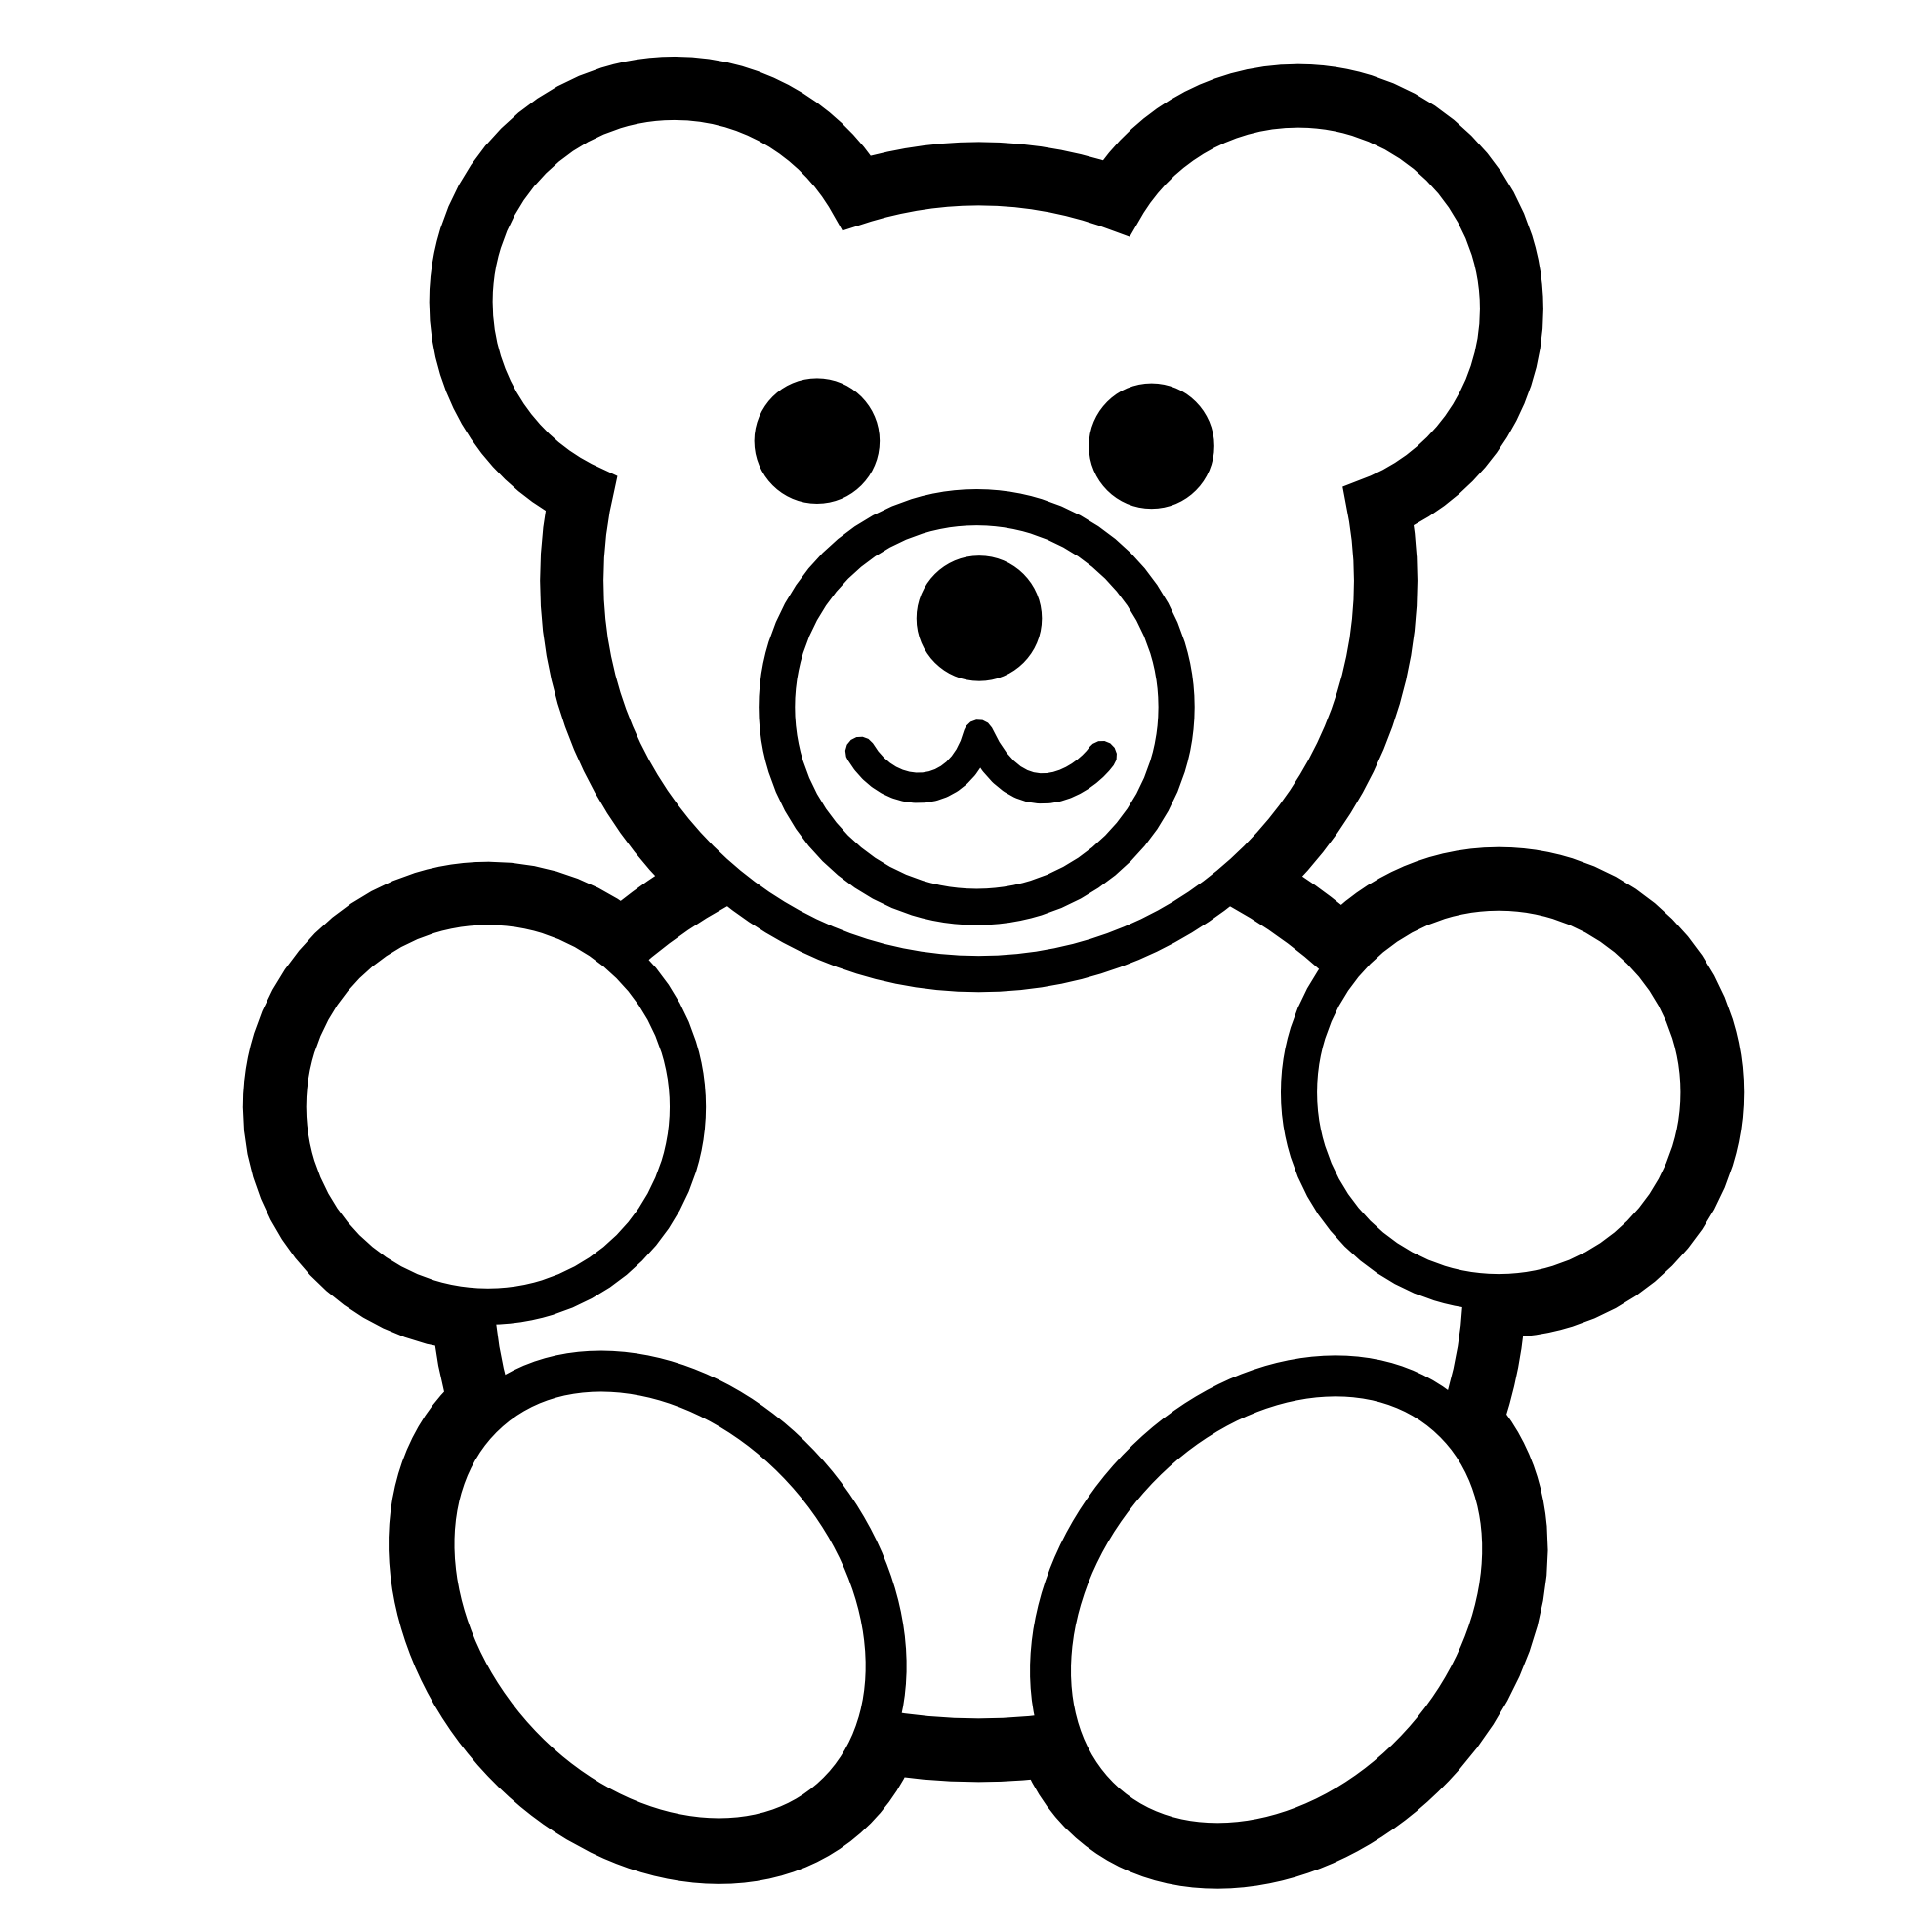 Different Colored Bears Clipart - ClipArt Best